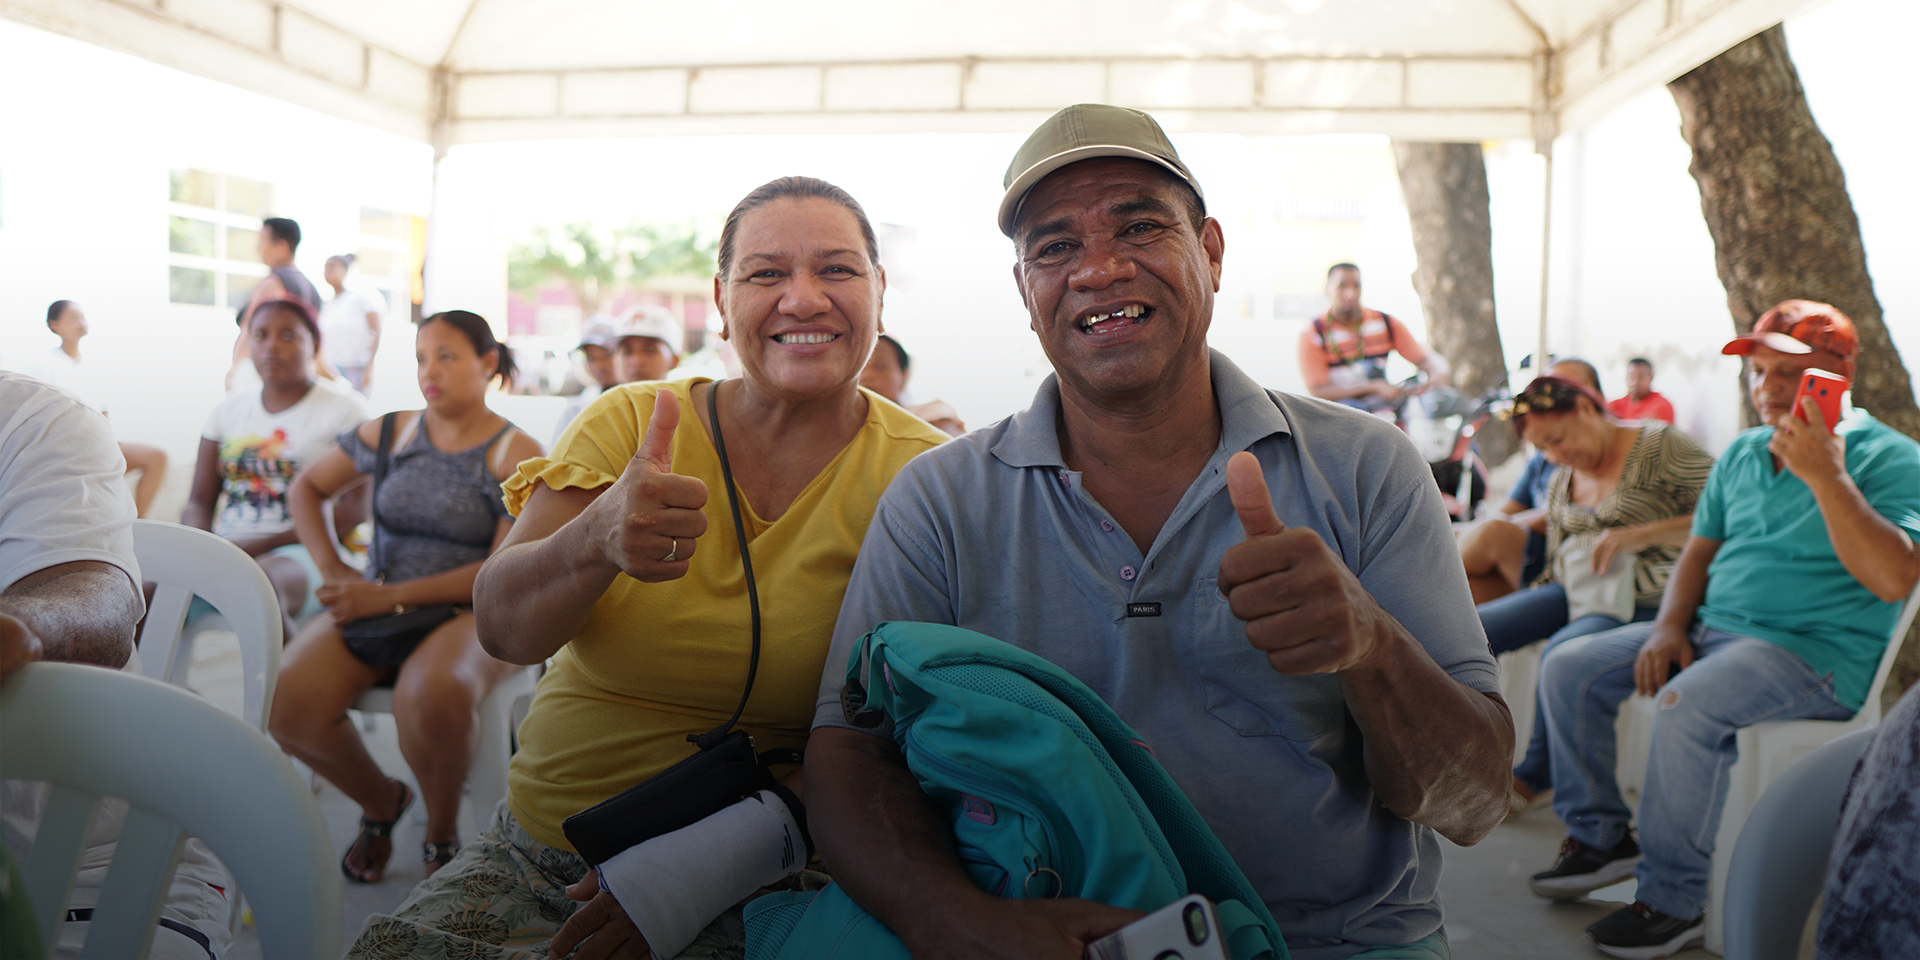 A man in a blue shirt and khaki baseball cap and a woman in a yellow shirt smiling and giving a thumbs up to the camera.